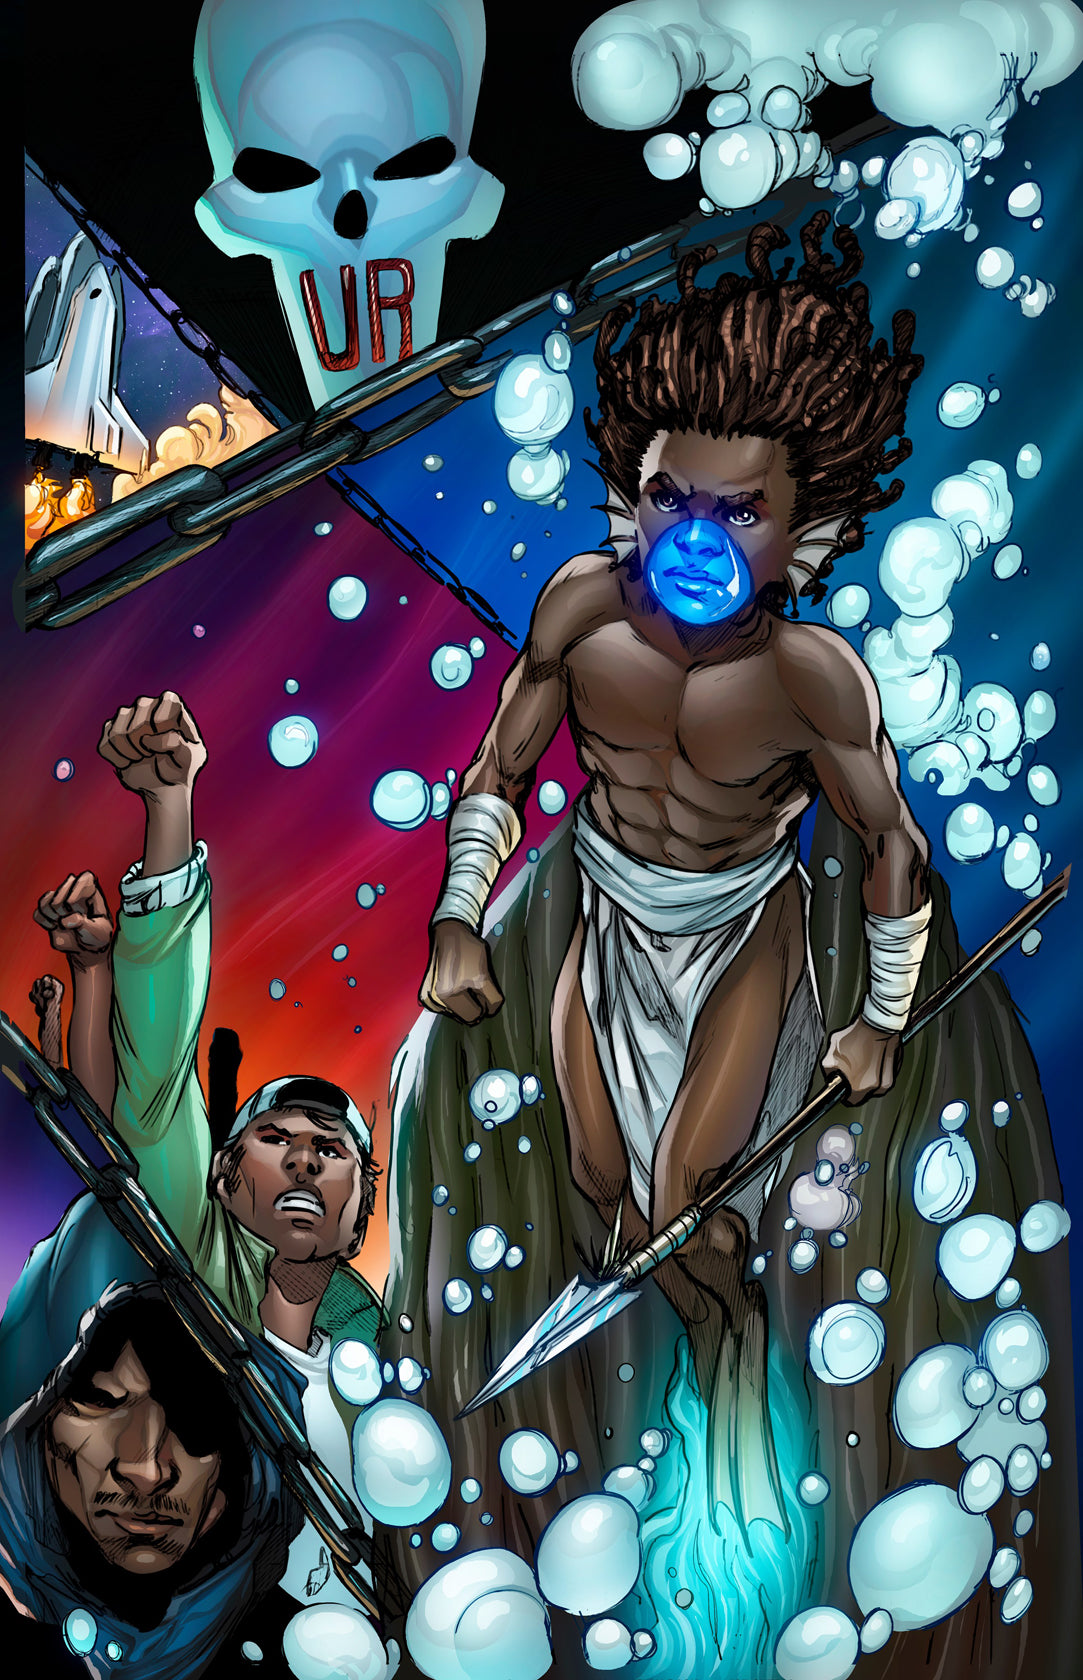 The Book Of Drexciya Vol 1 published this week - The Wire